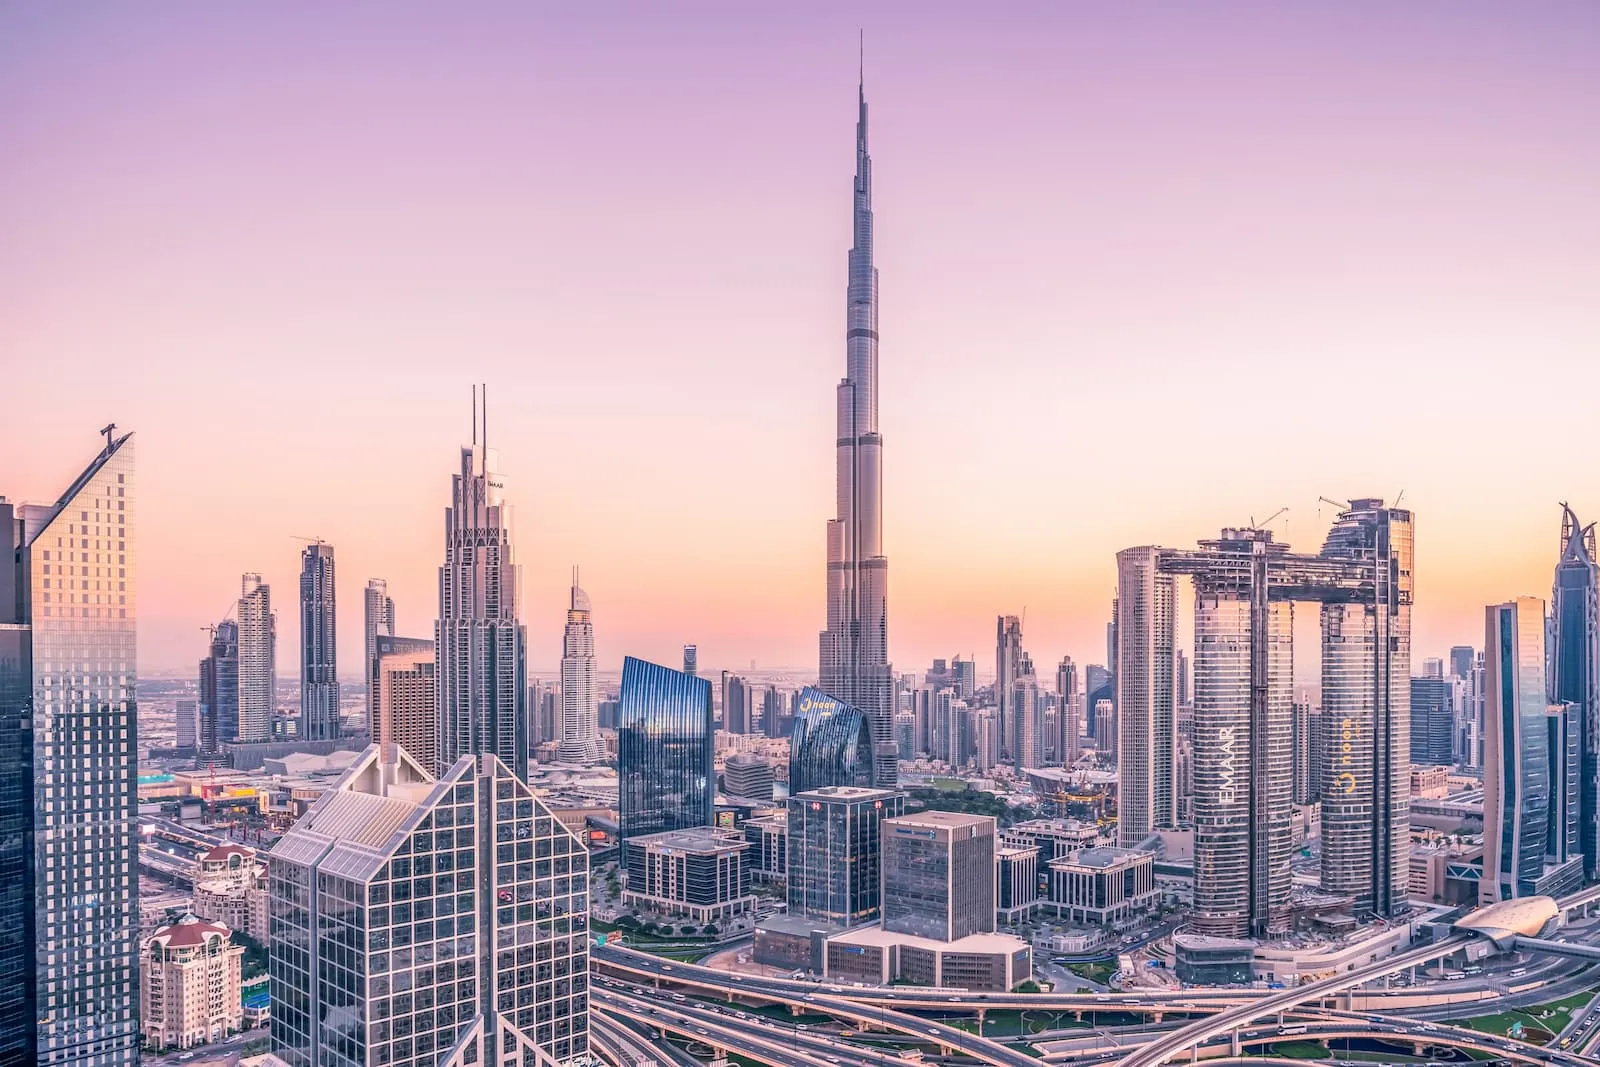 5-Day & 7-Day Itinerary For Dubai | The Best Trip Planning